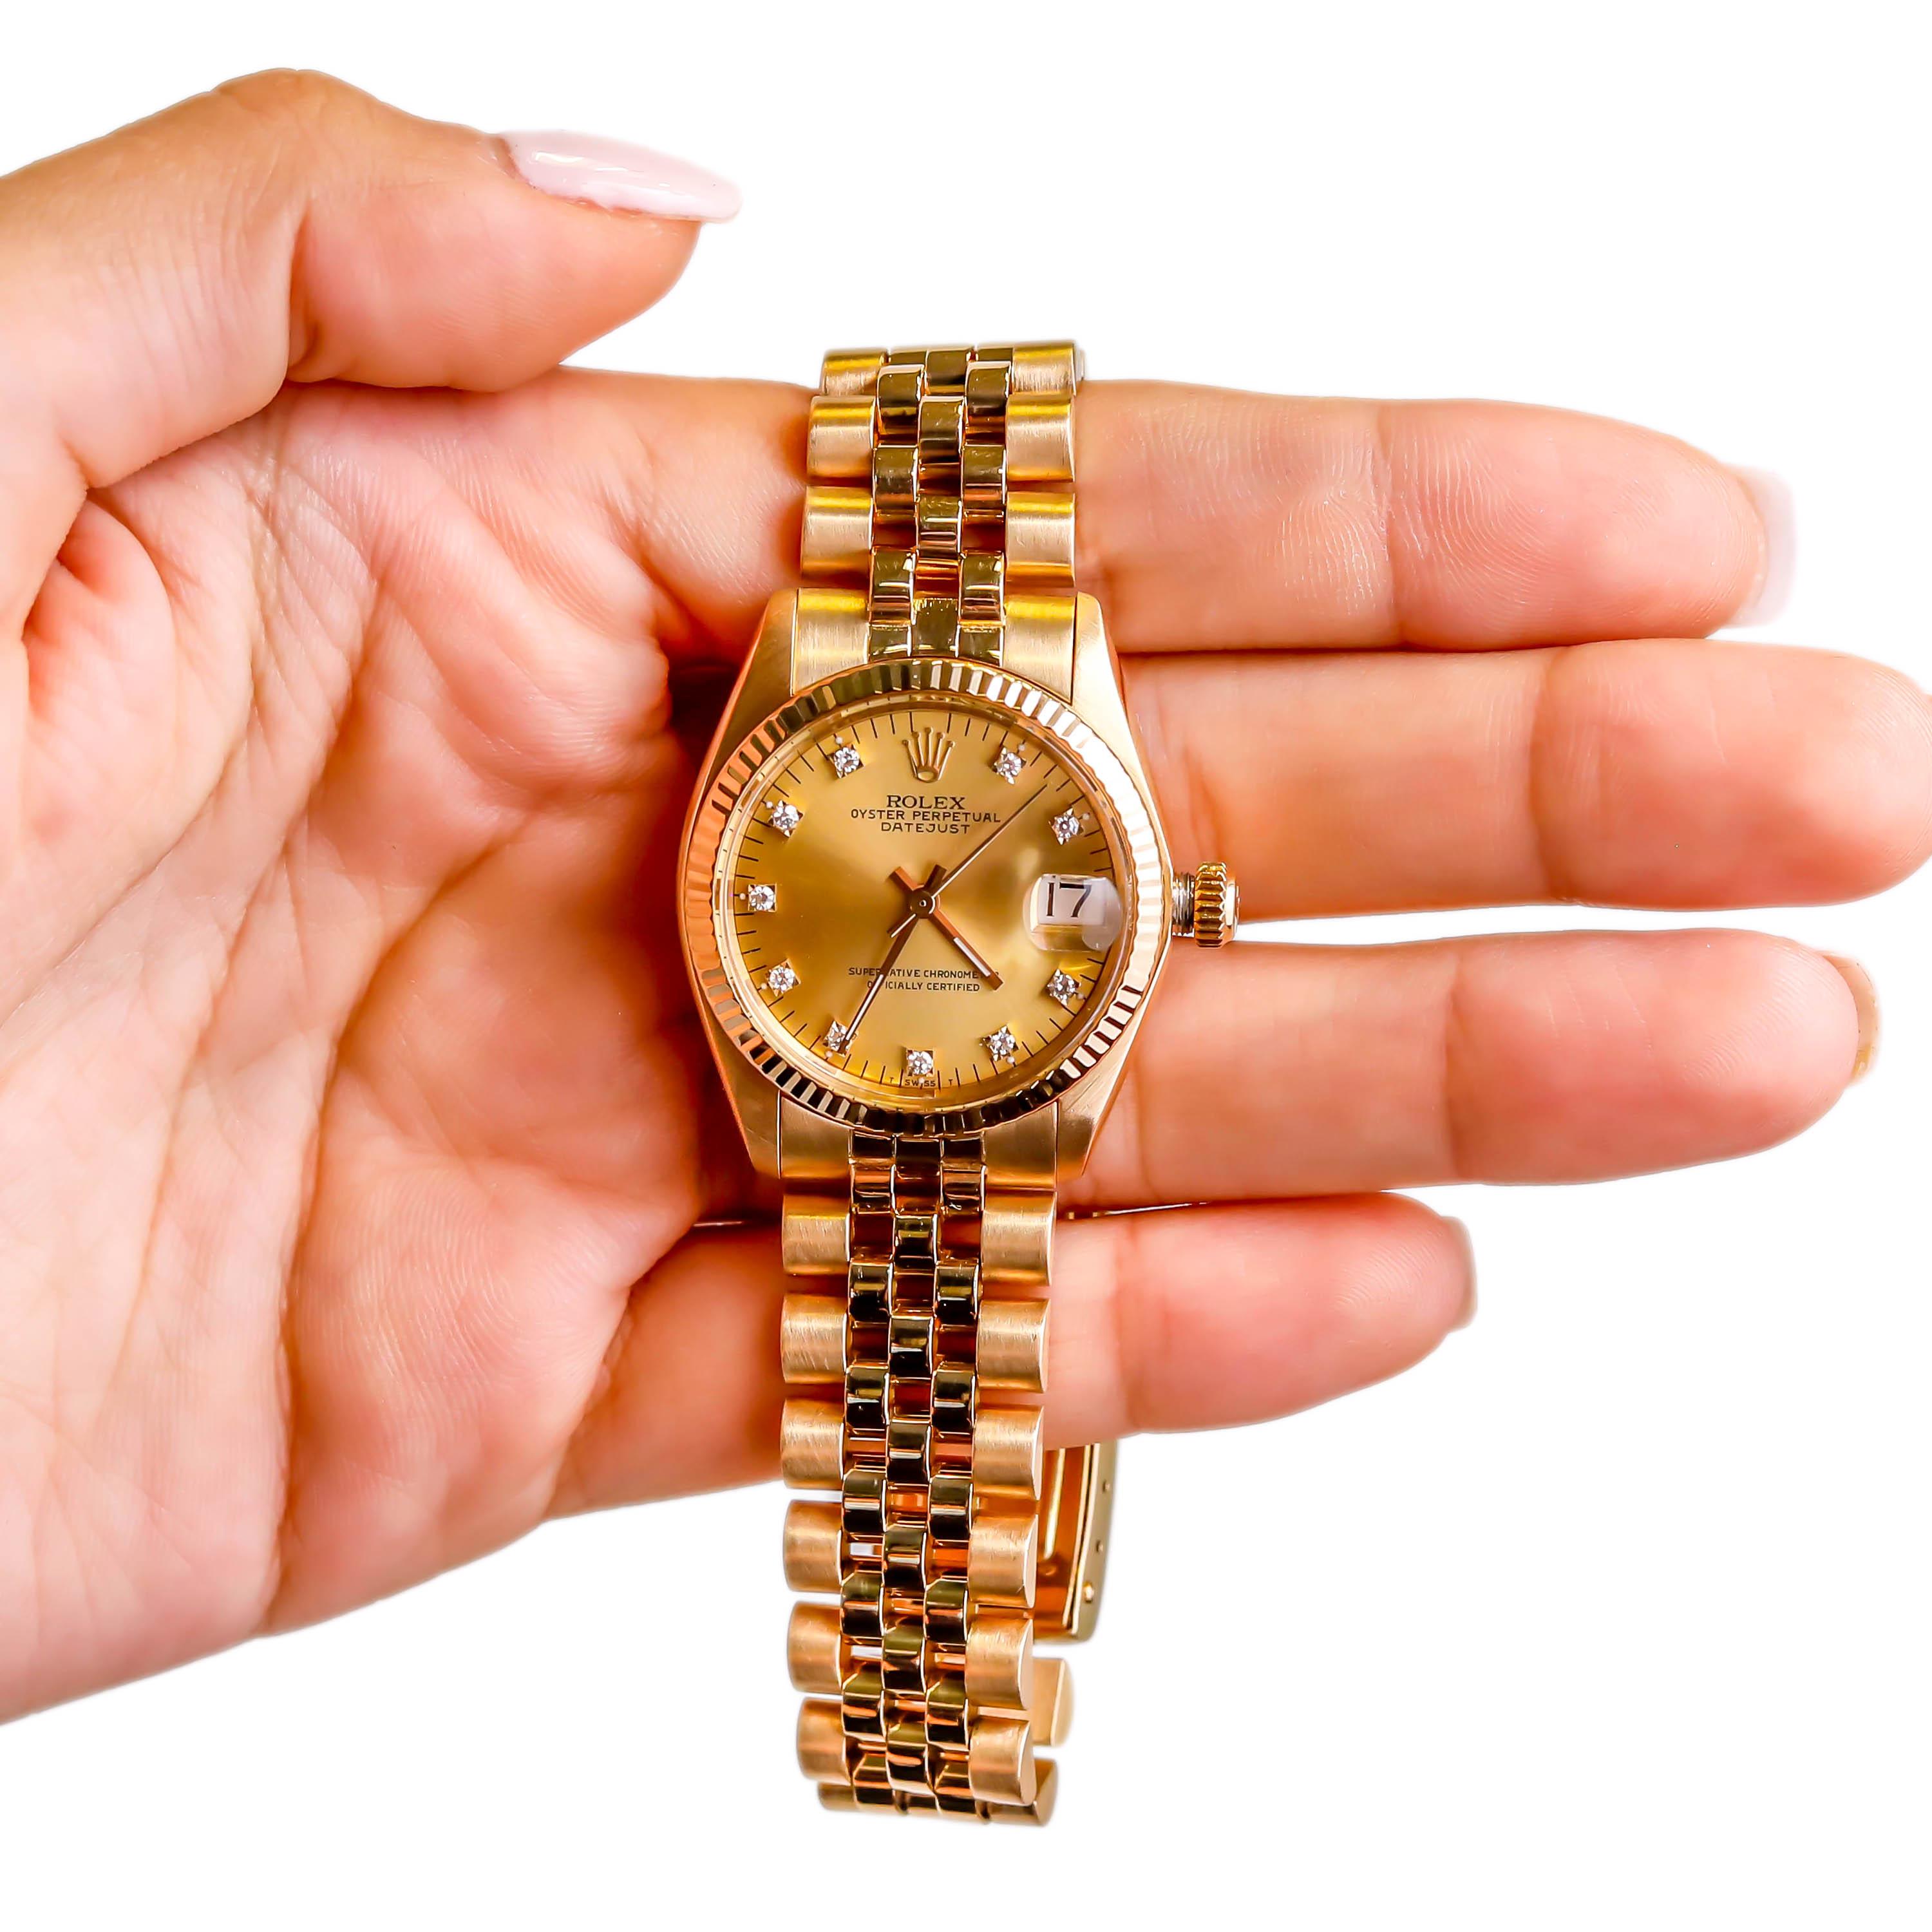 Rolex Datejust 18 Karat Gold Champaign Diamond Dial Jubilee Bracelet Watch In Excellent Condition For Sale In New York, NY